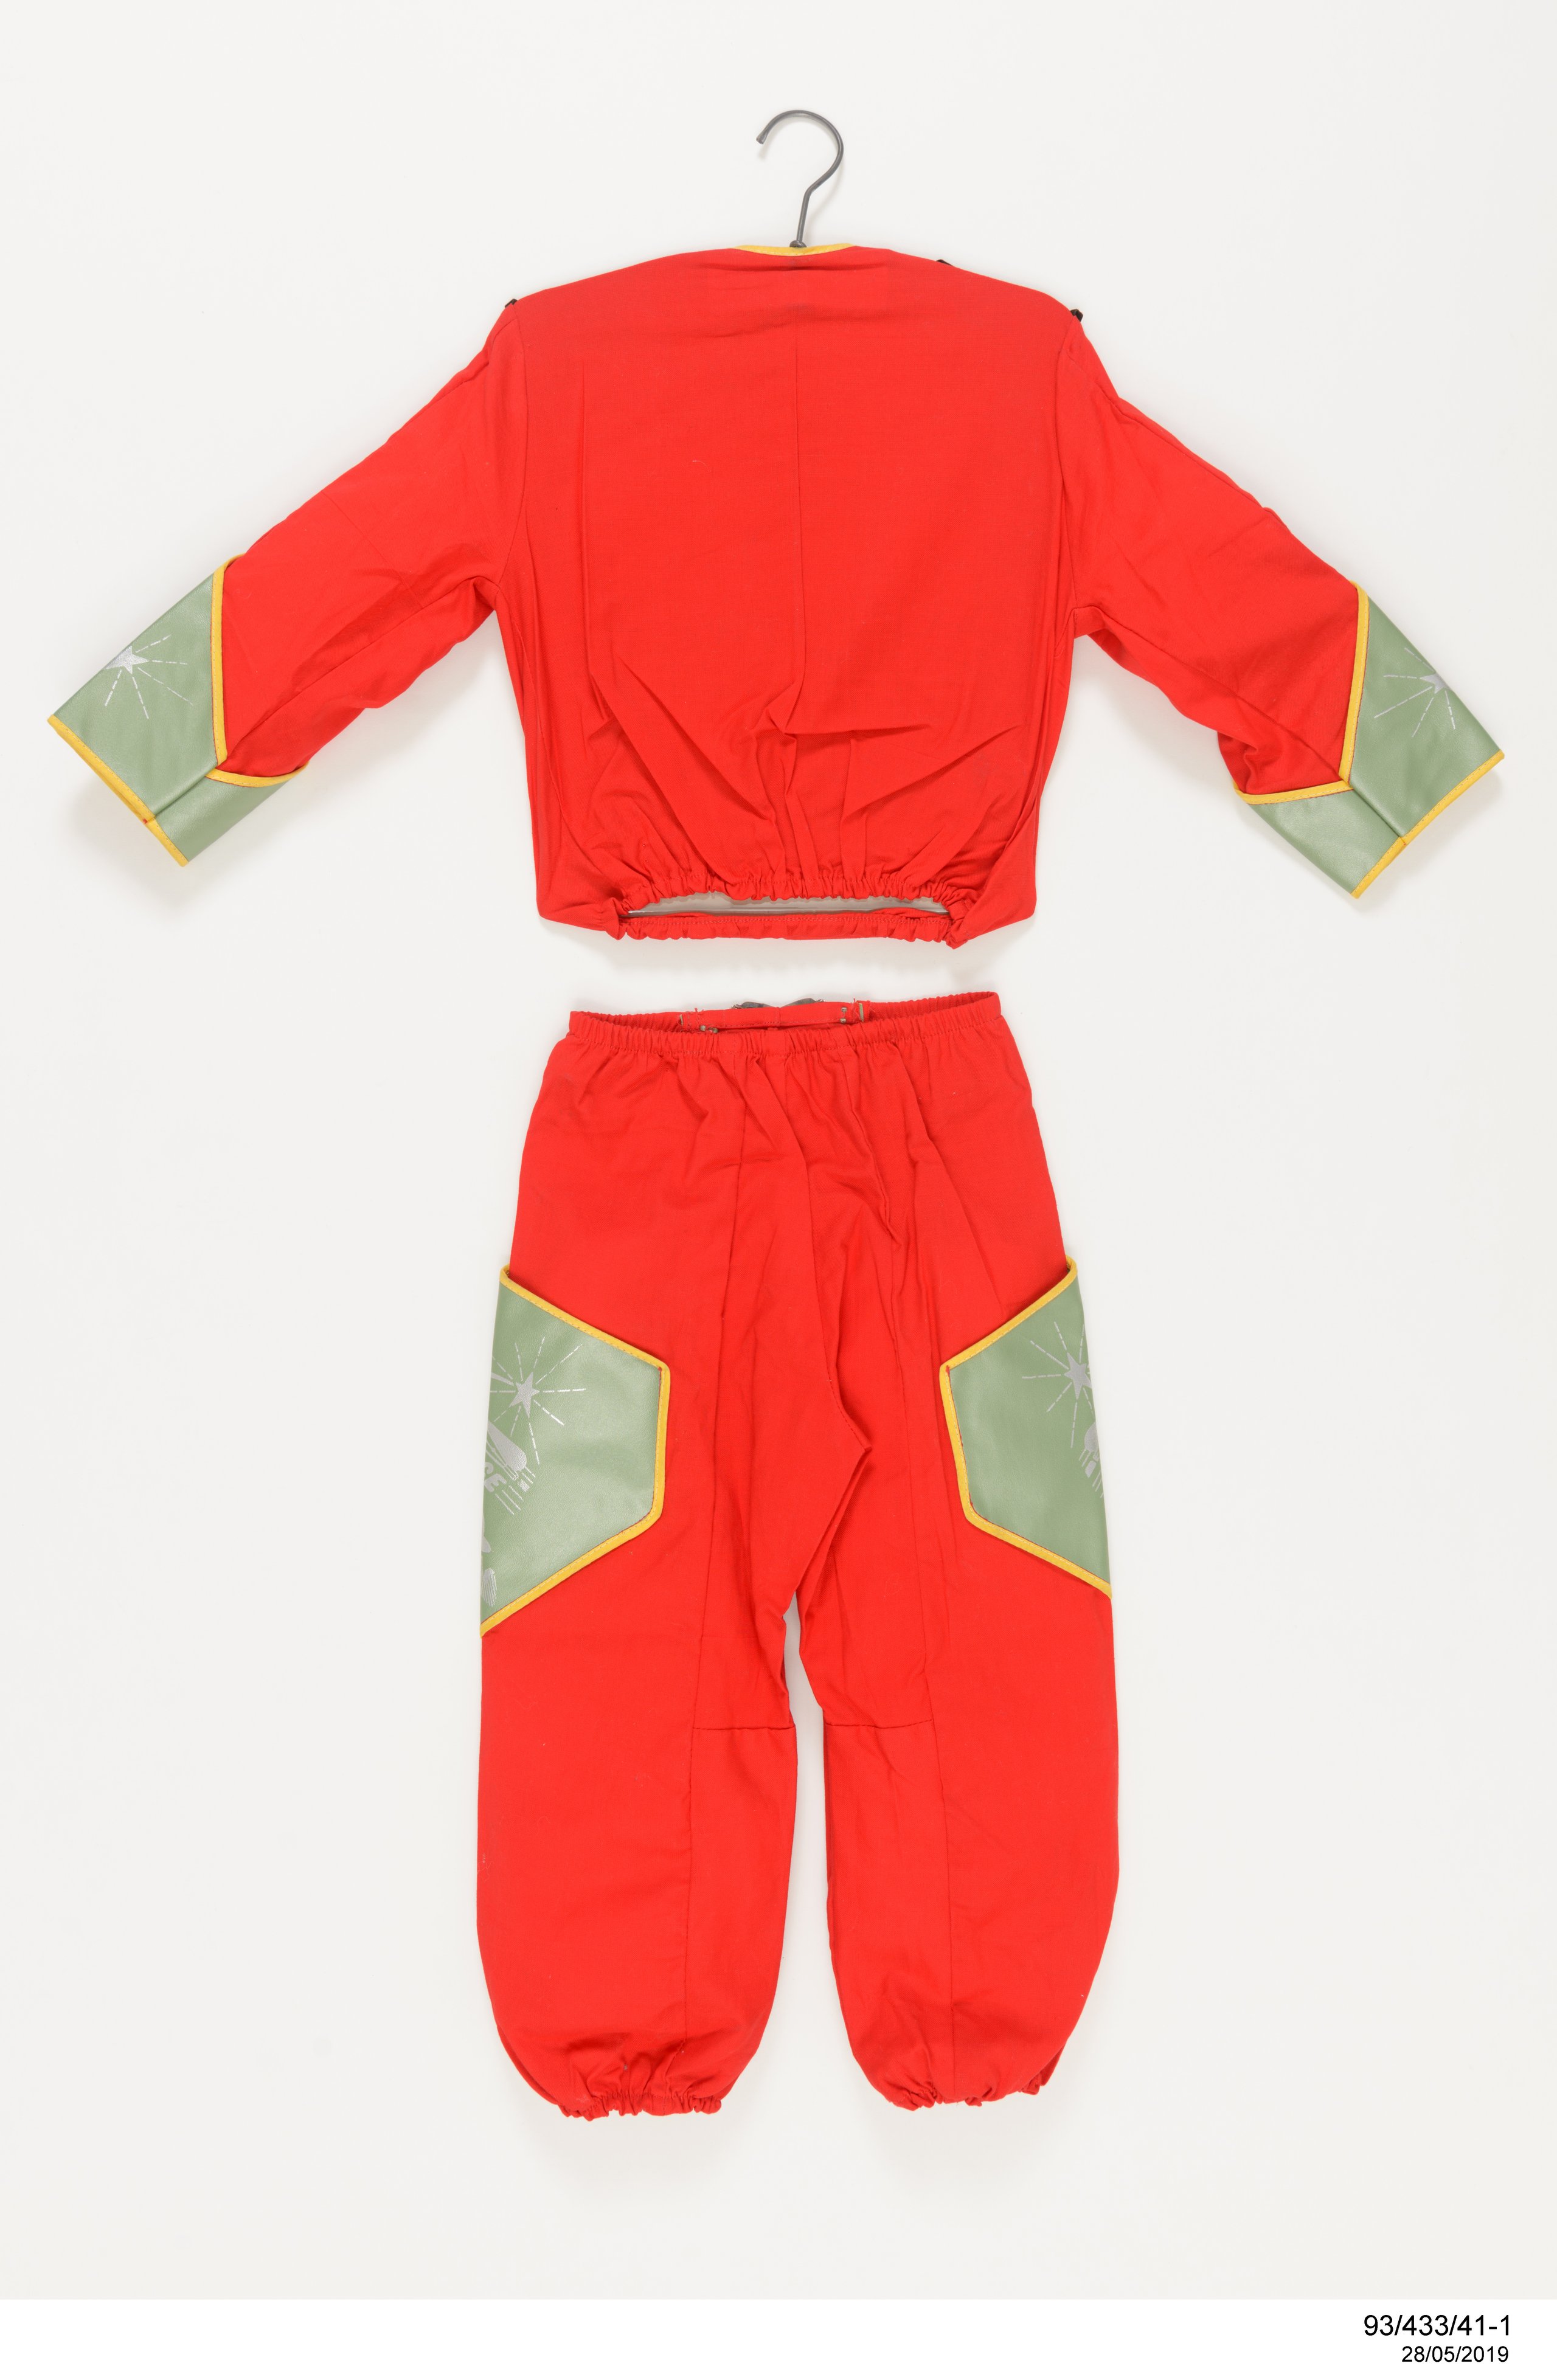 Childs 'Space outfit' fancy dress costume